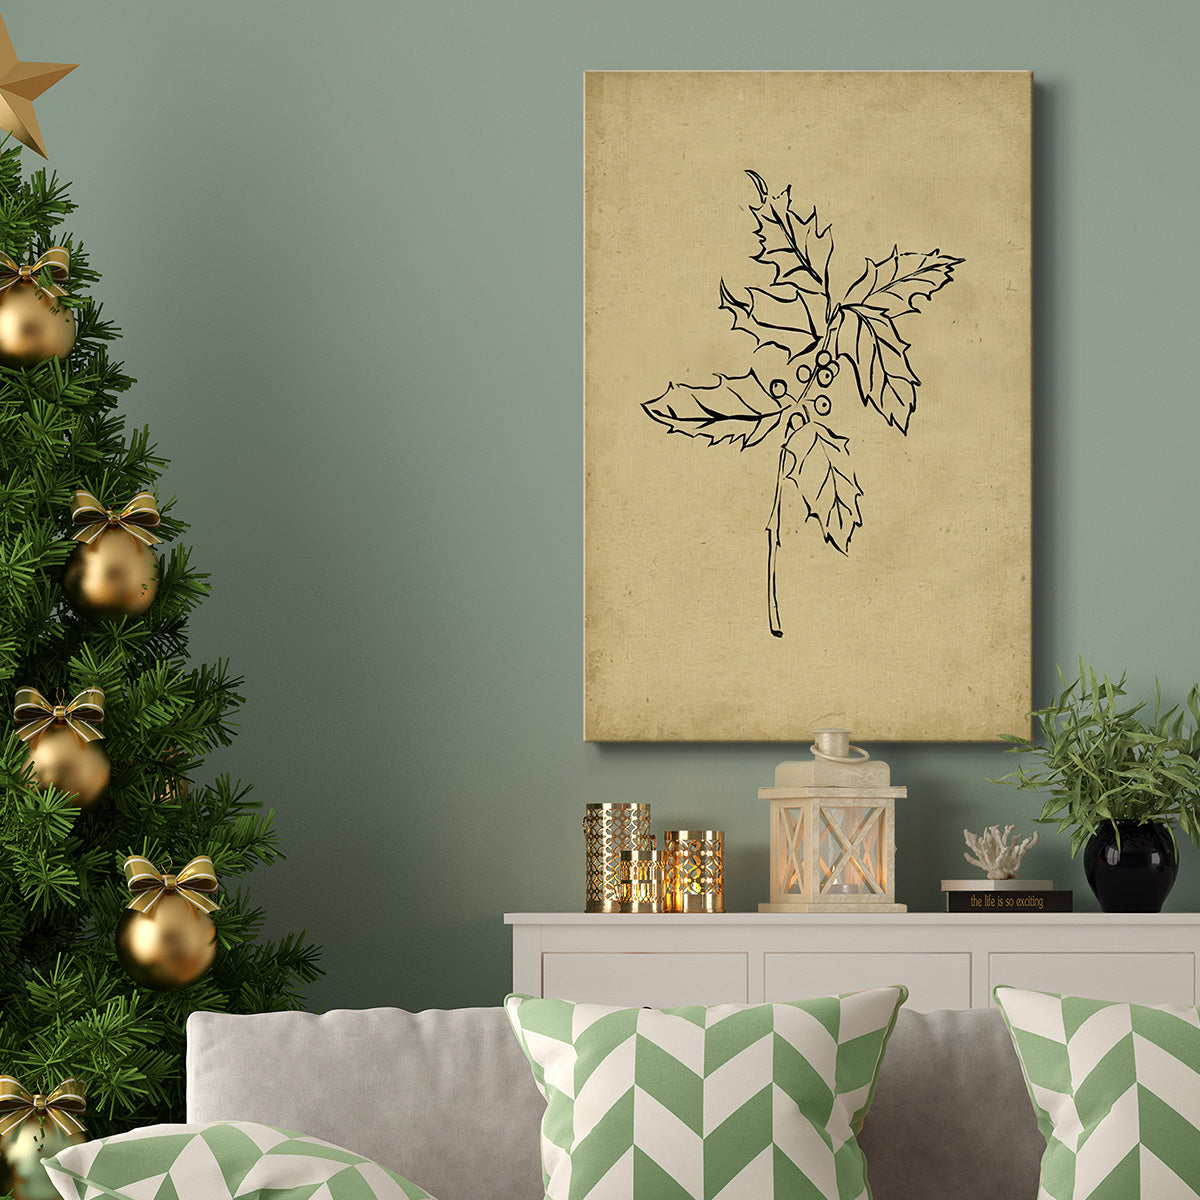 Holly Branch I - Gallery Wrapped Canvas